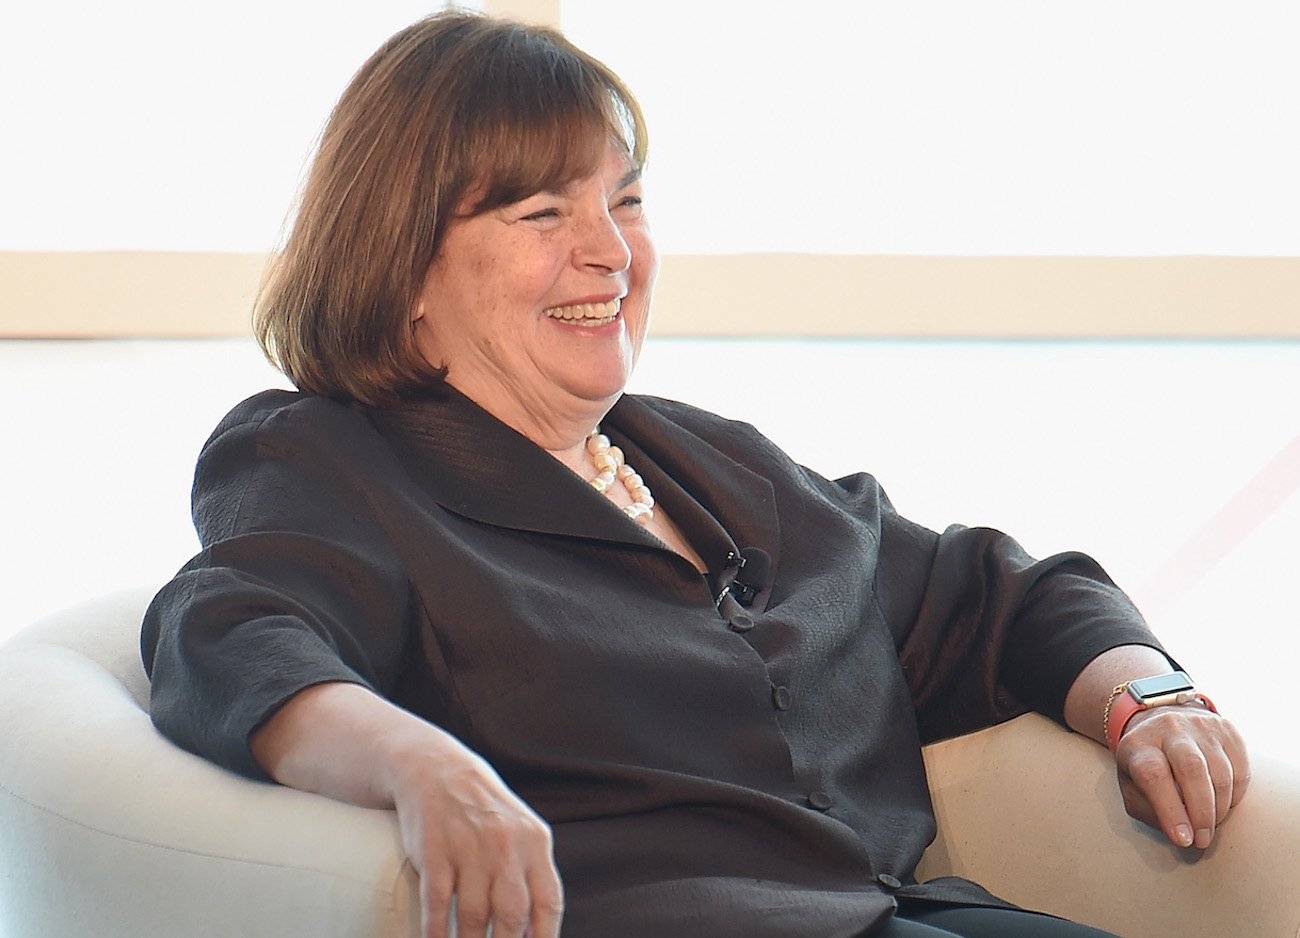 Ina Garten smiles as she sits in a chair wearing a black button down shirt